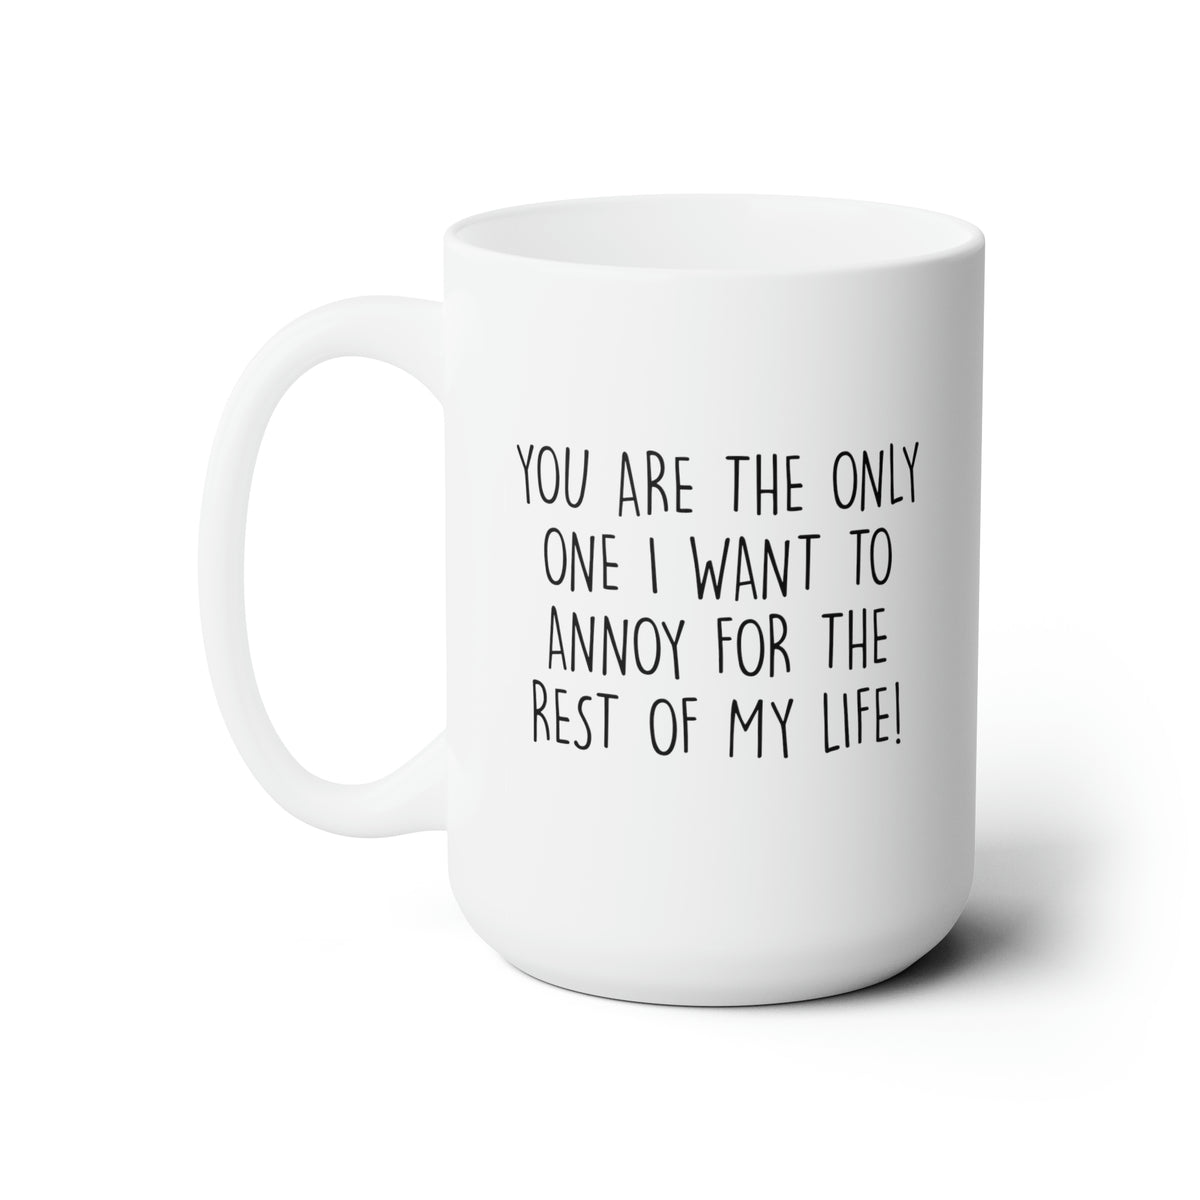 Cute Gifts for Wife and Husband, You Are The Only One I Want To Annoy For The Rest Of My Life, Funny Coffee Mug For Him Her, Love Cup For Wife Husband Girlfriend Boyfriend